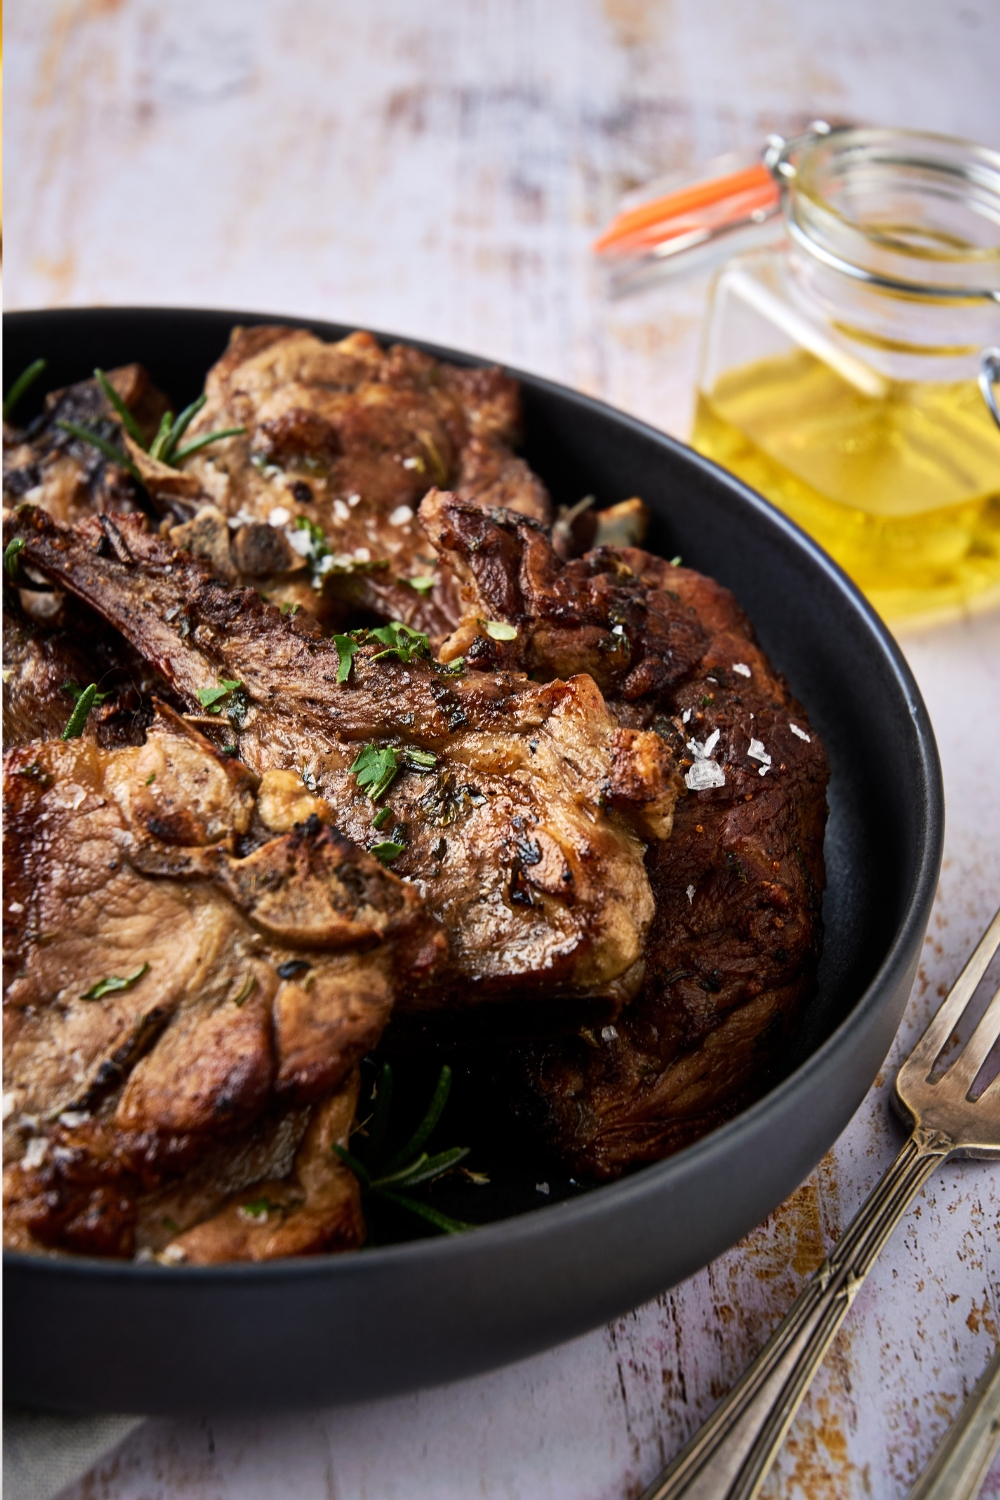 A black dish holds a pile of lamb shoulder chops garnished with fresh herbs and sea salt.